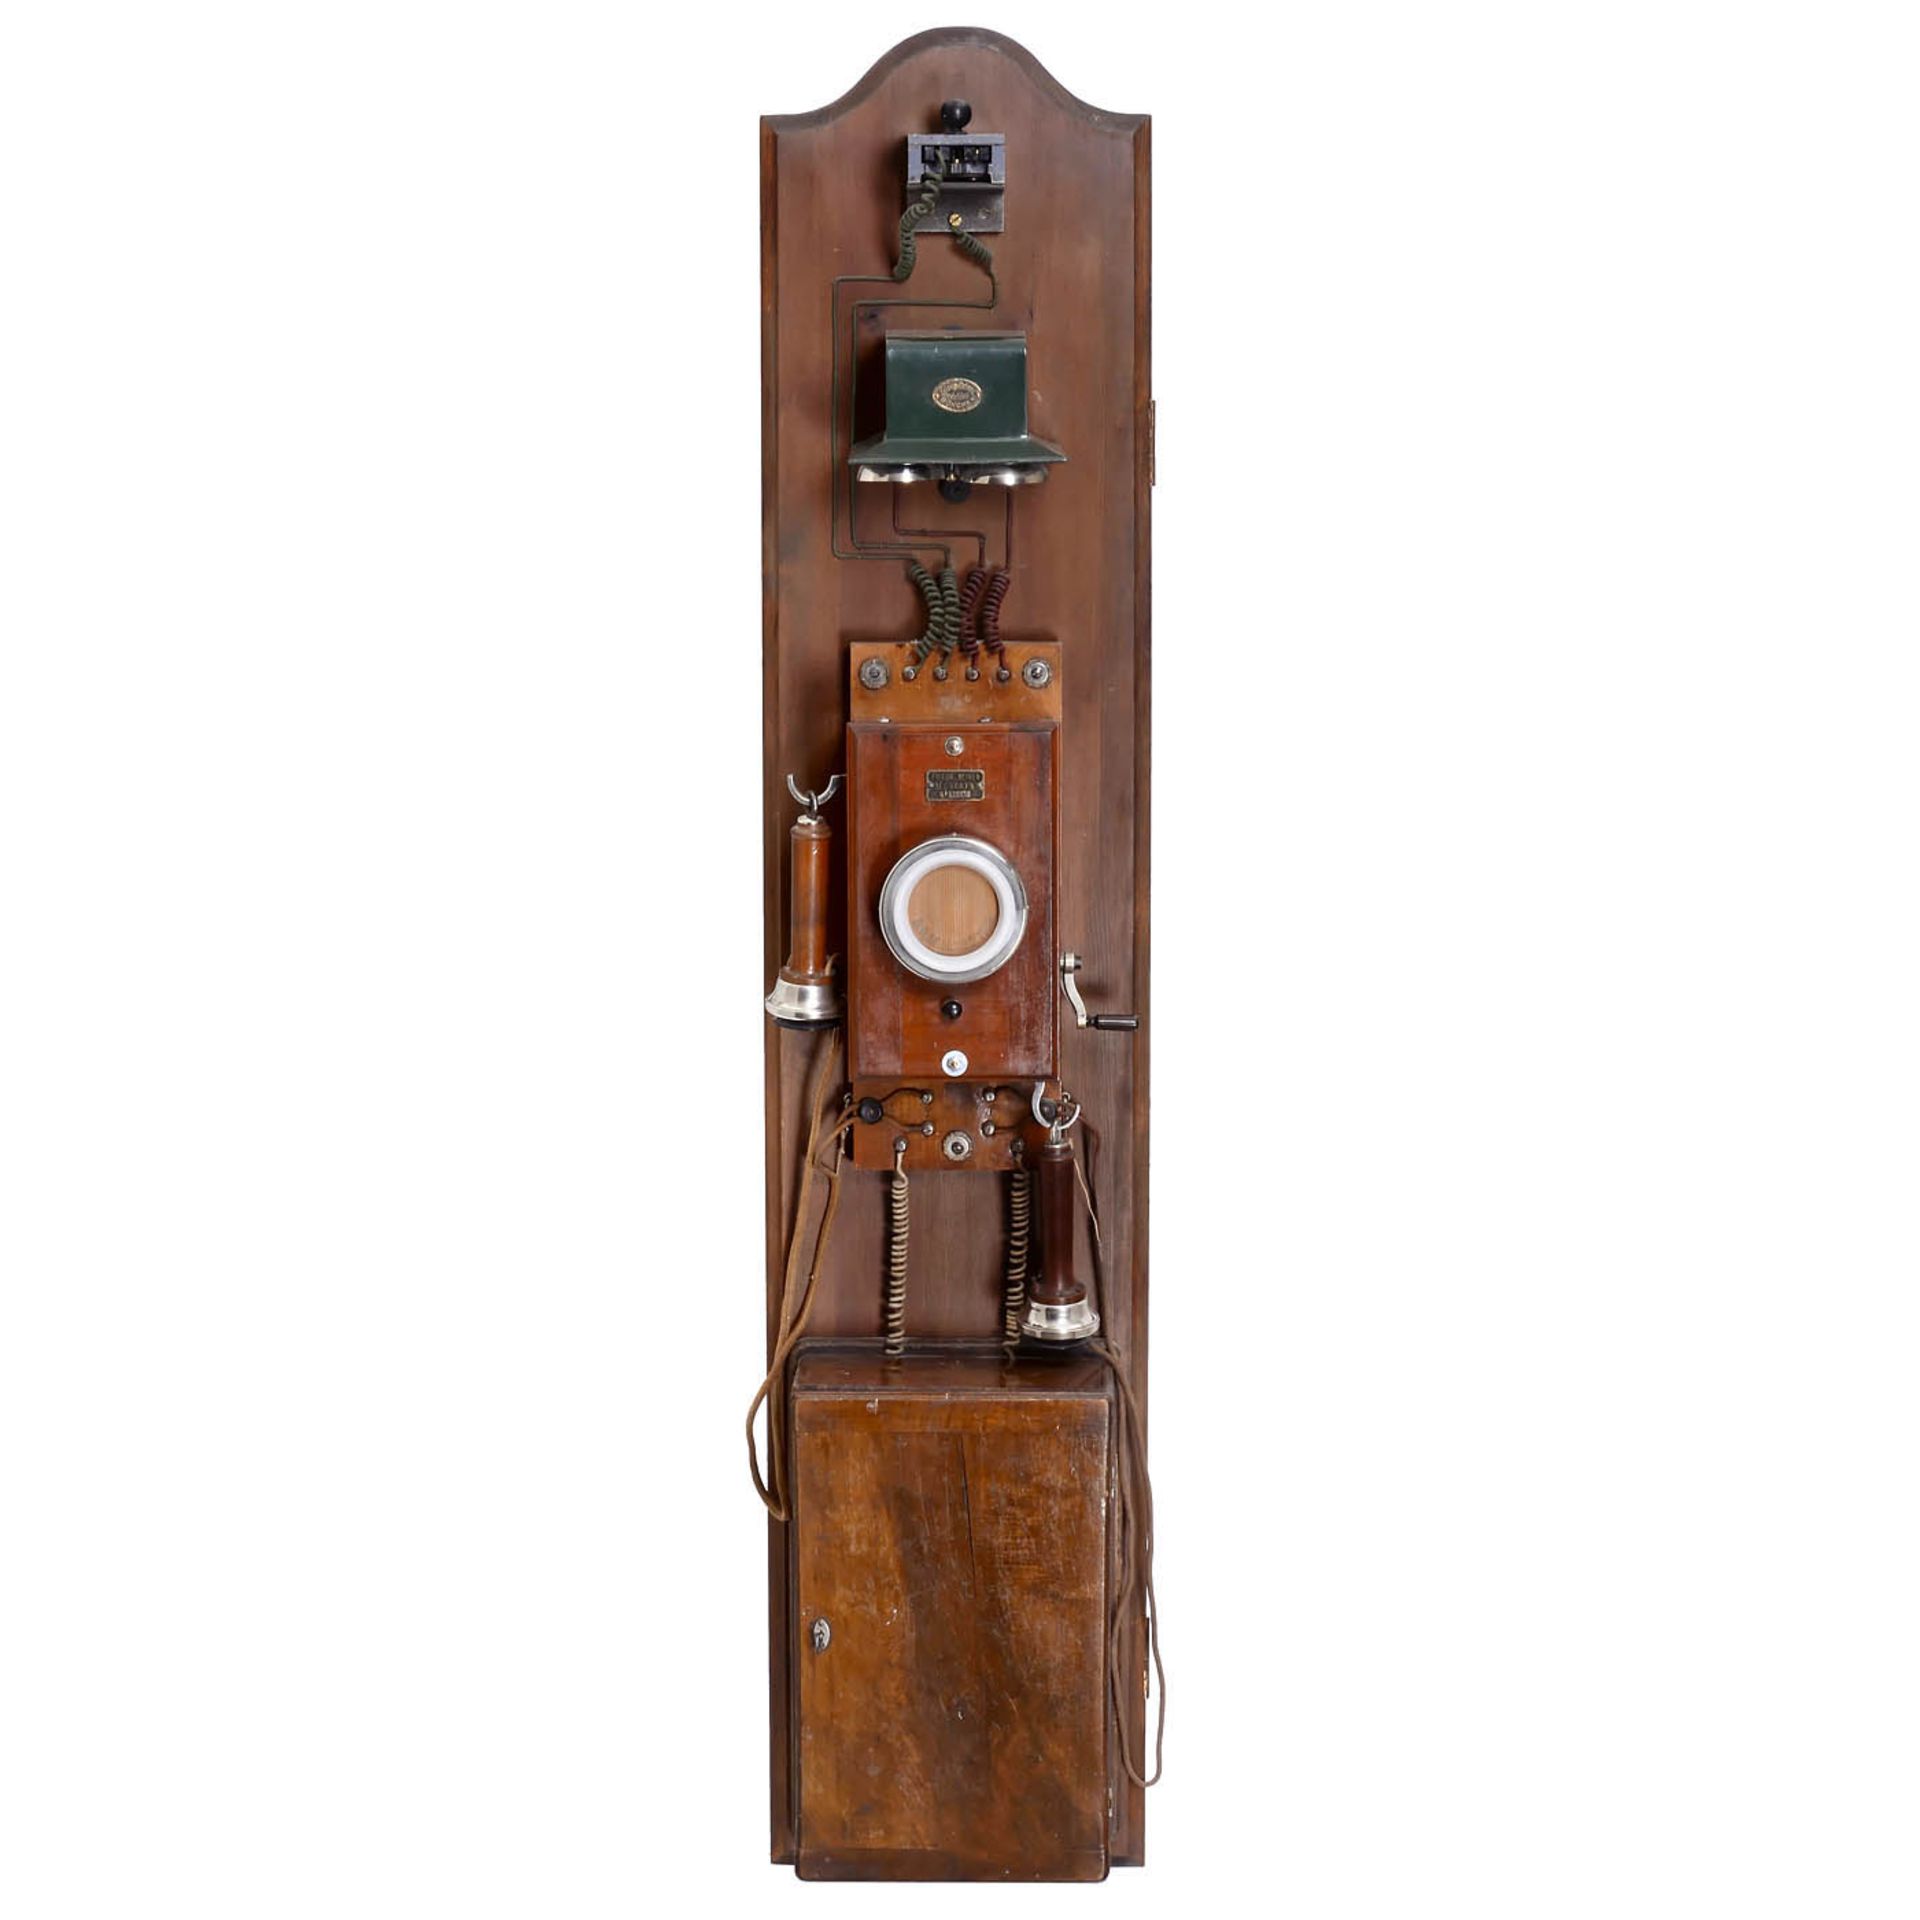 Bavarian Wall-mounted Telephone Station by Reiner, 1892 onwards - Image 2 of 4